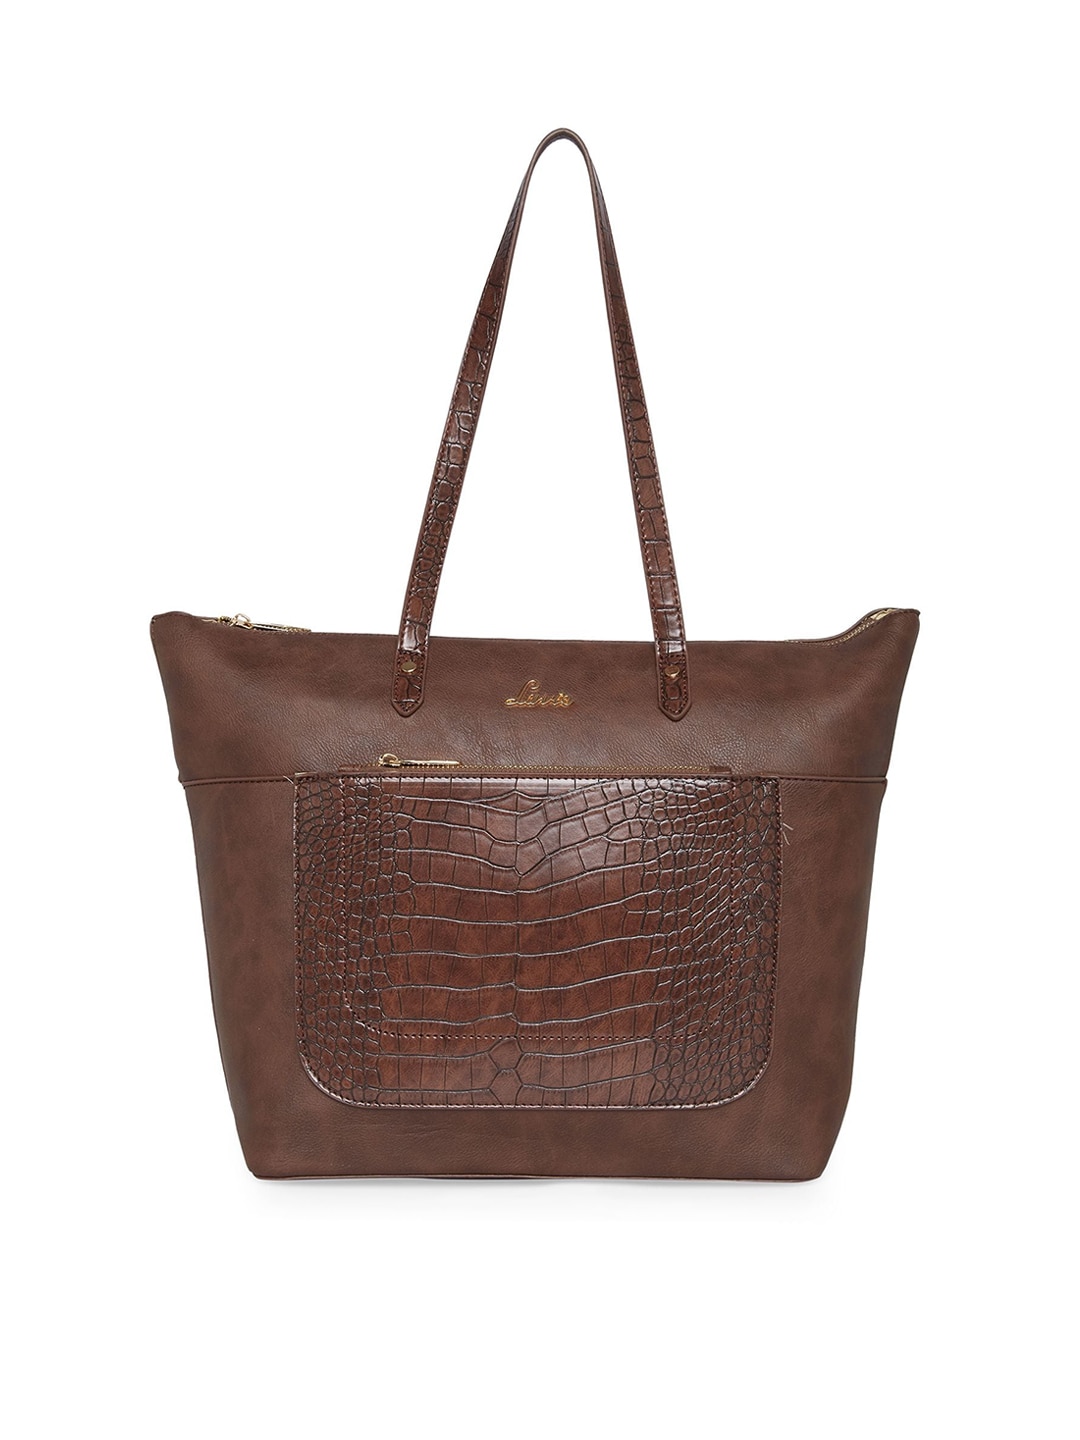 Lavie Brown Textured Structured Shoulder Bag Price in India